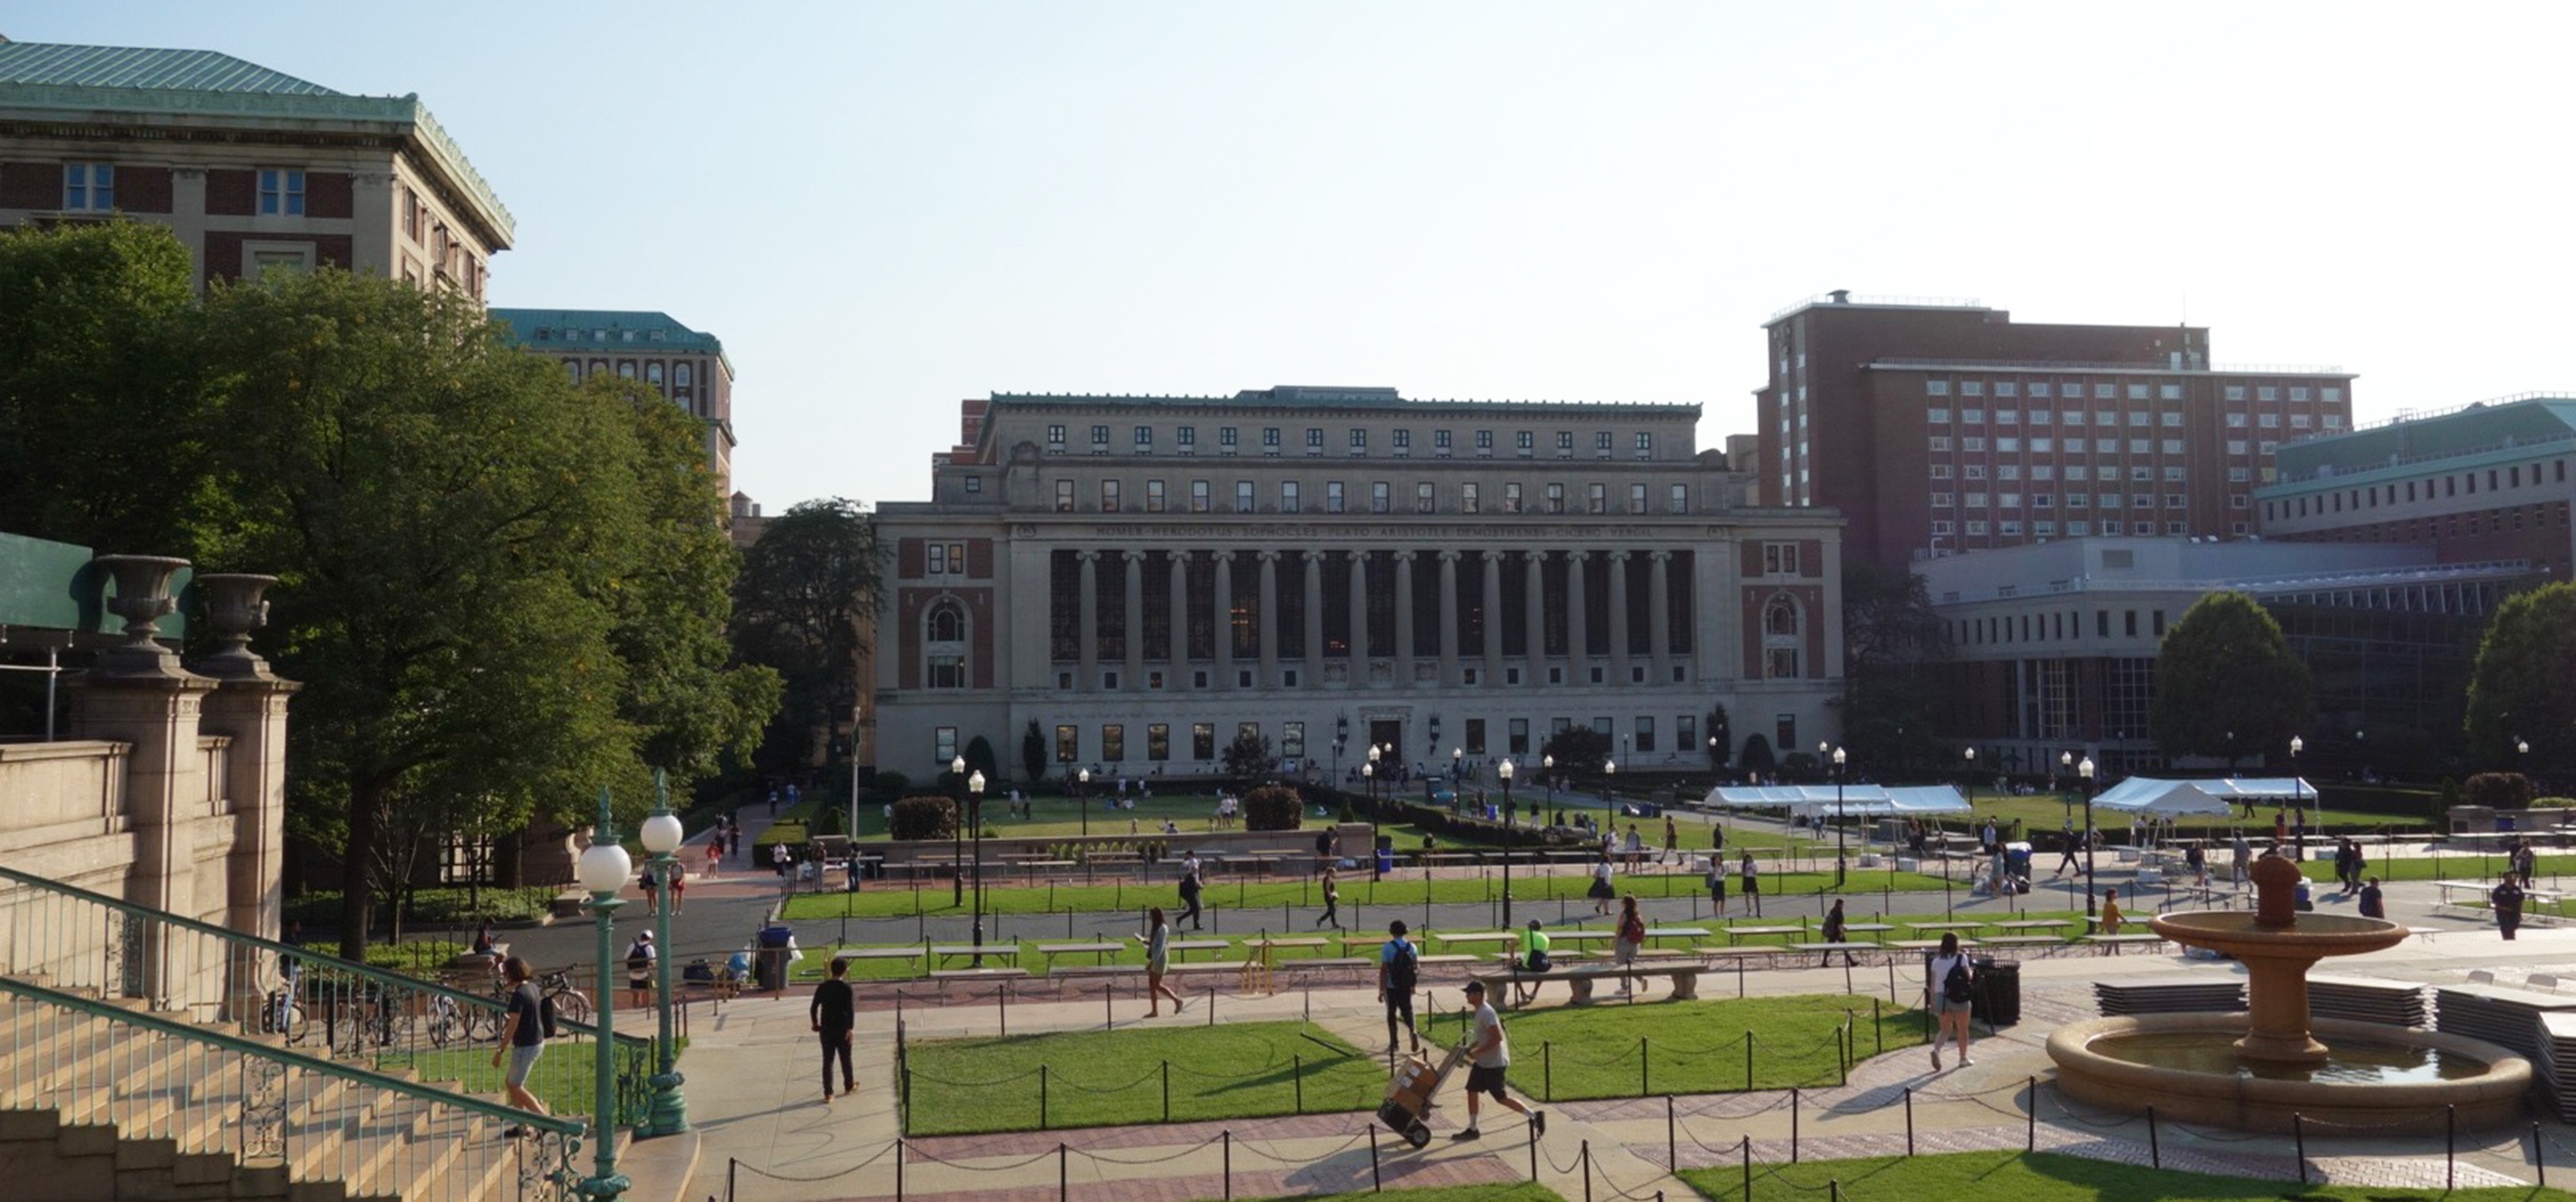 Columbia University Butler Library Plaza at sunset